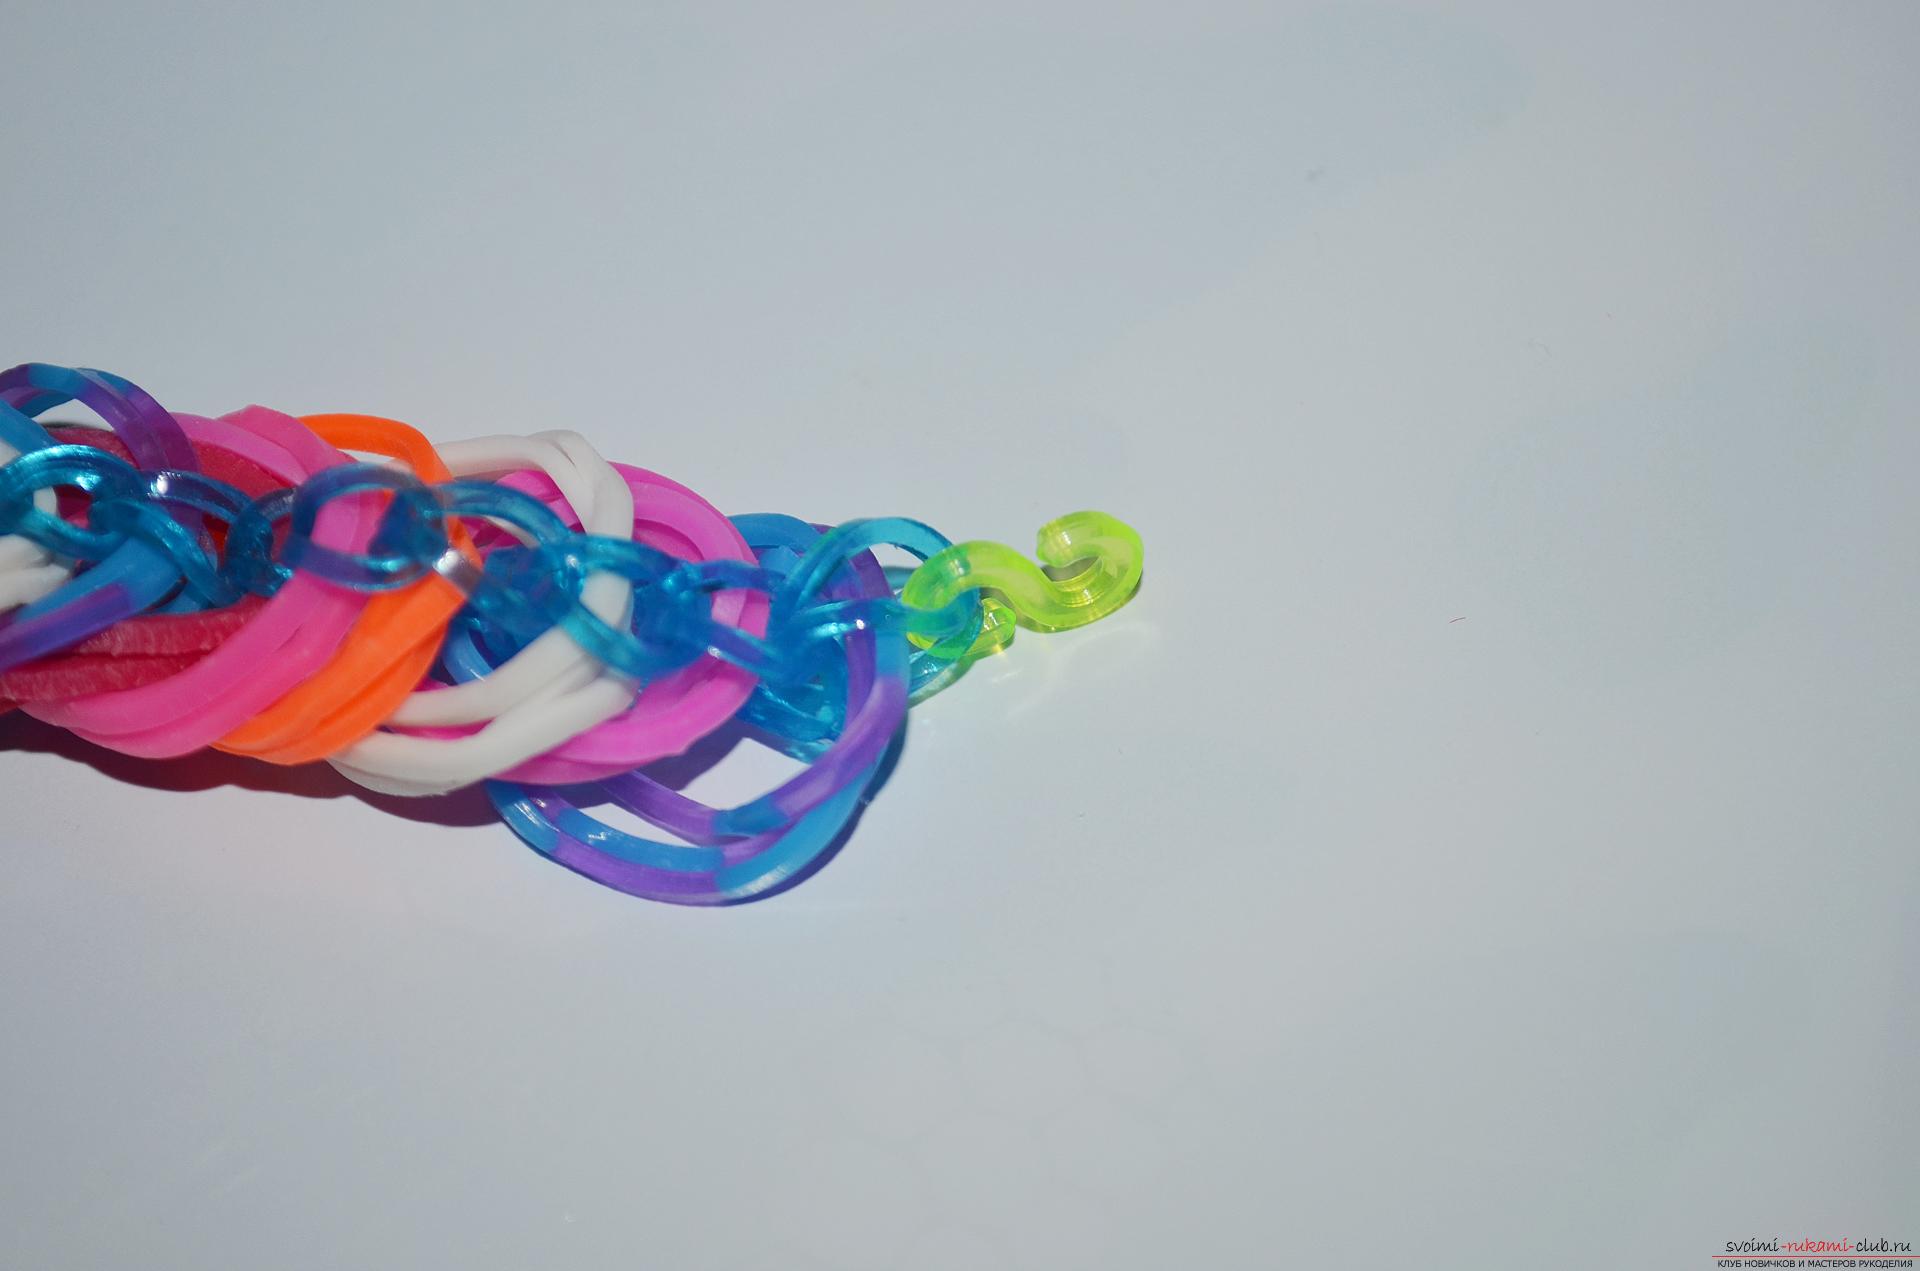 Photo for a lesson on braiding from a rubber band of a bracelet 